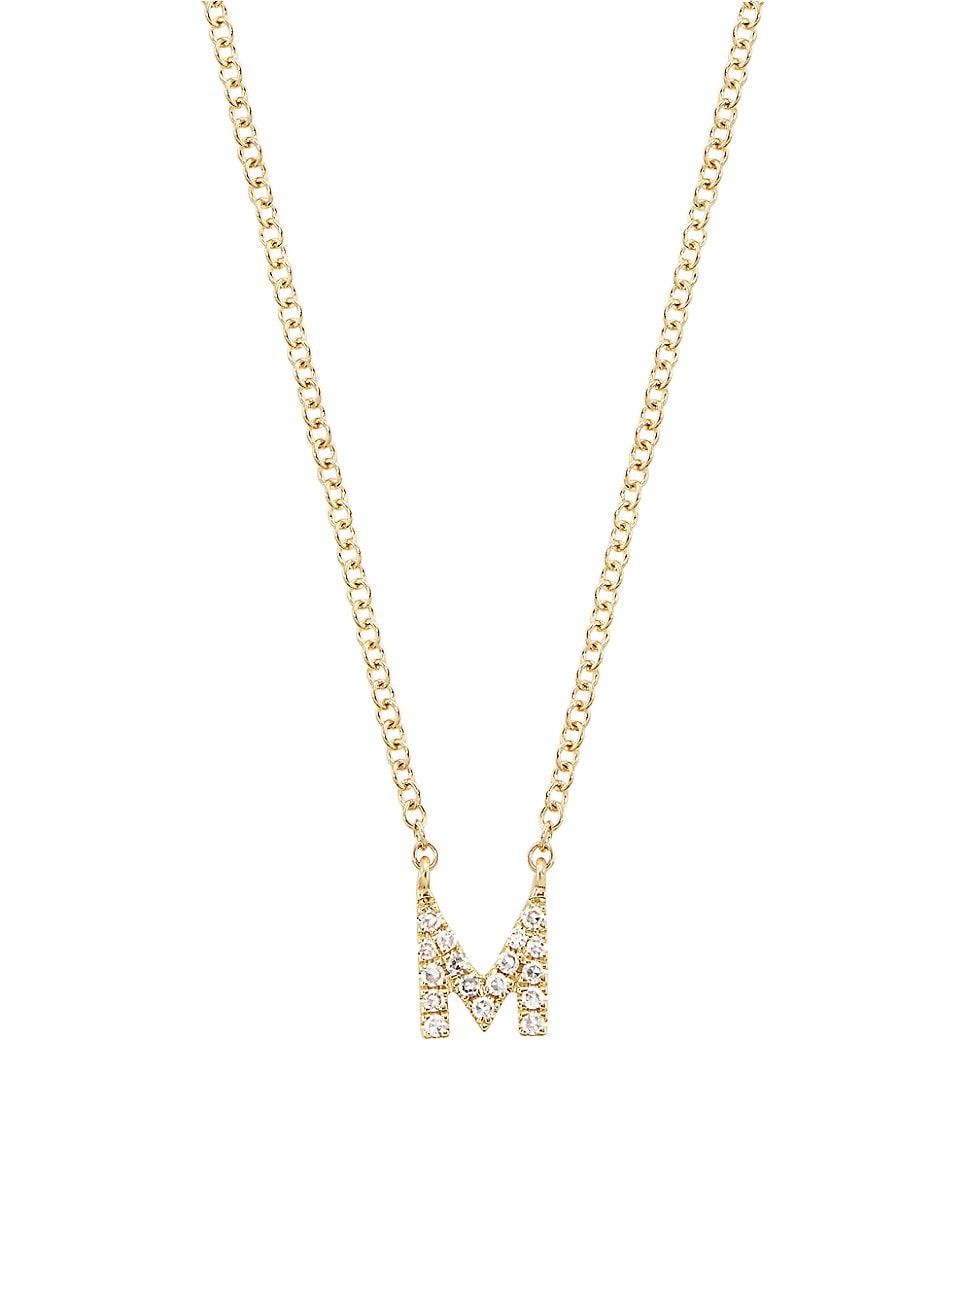 Women's 14K Yellow Gold & 0.03 TCW Diamond Initial Pendant Necklace - Initial M - Initial M - Size M | Saks Fifth Avenue